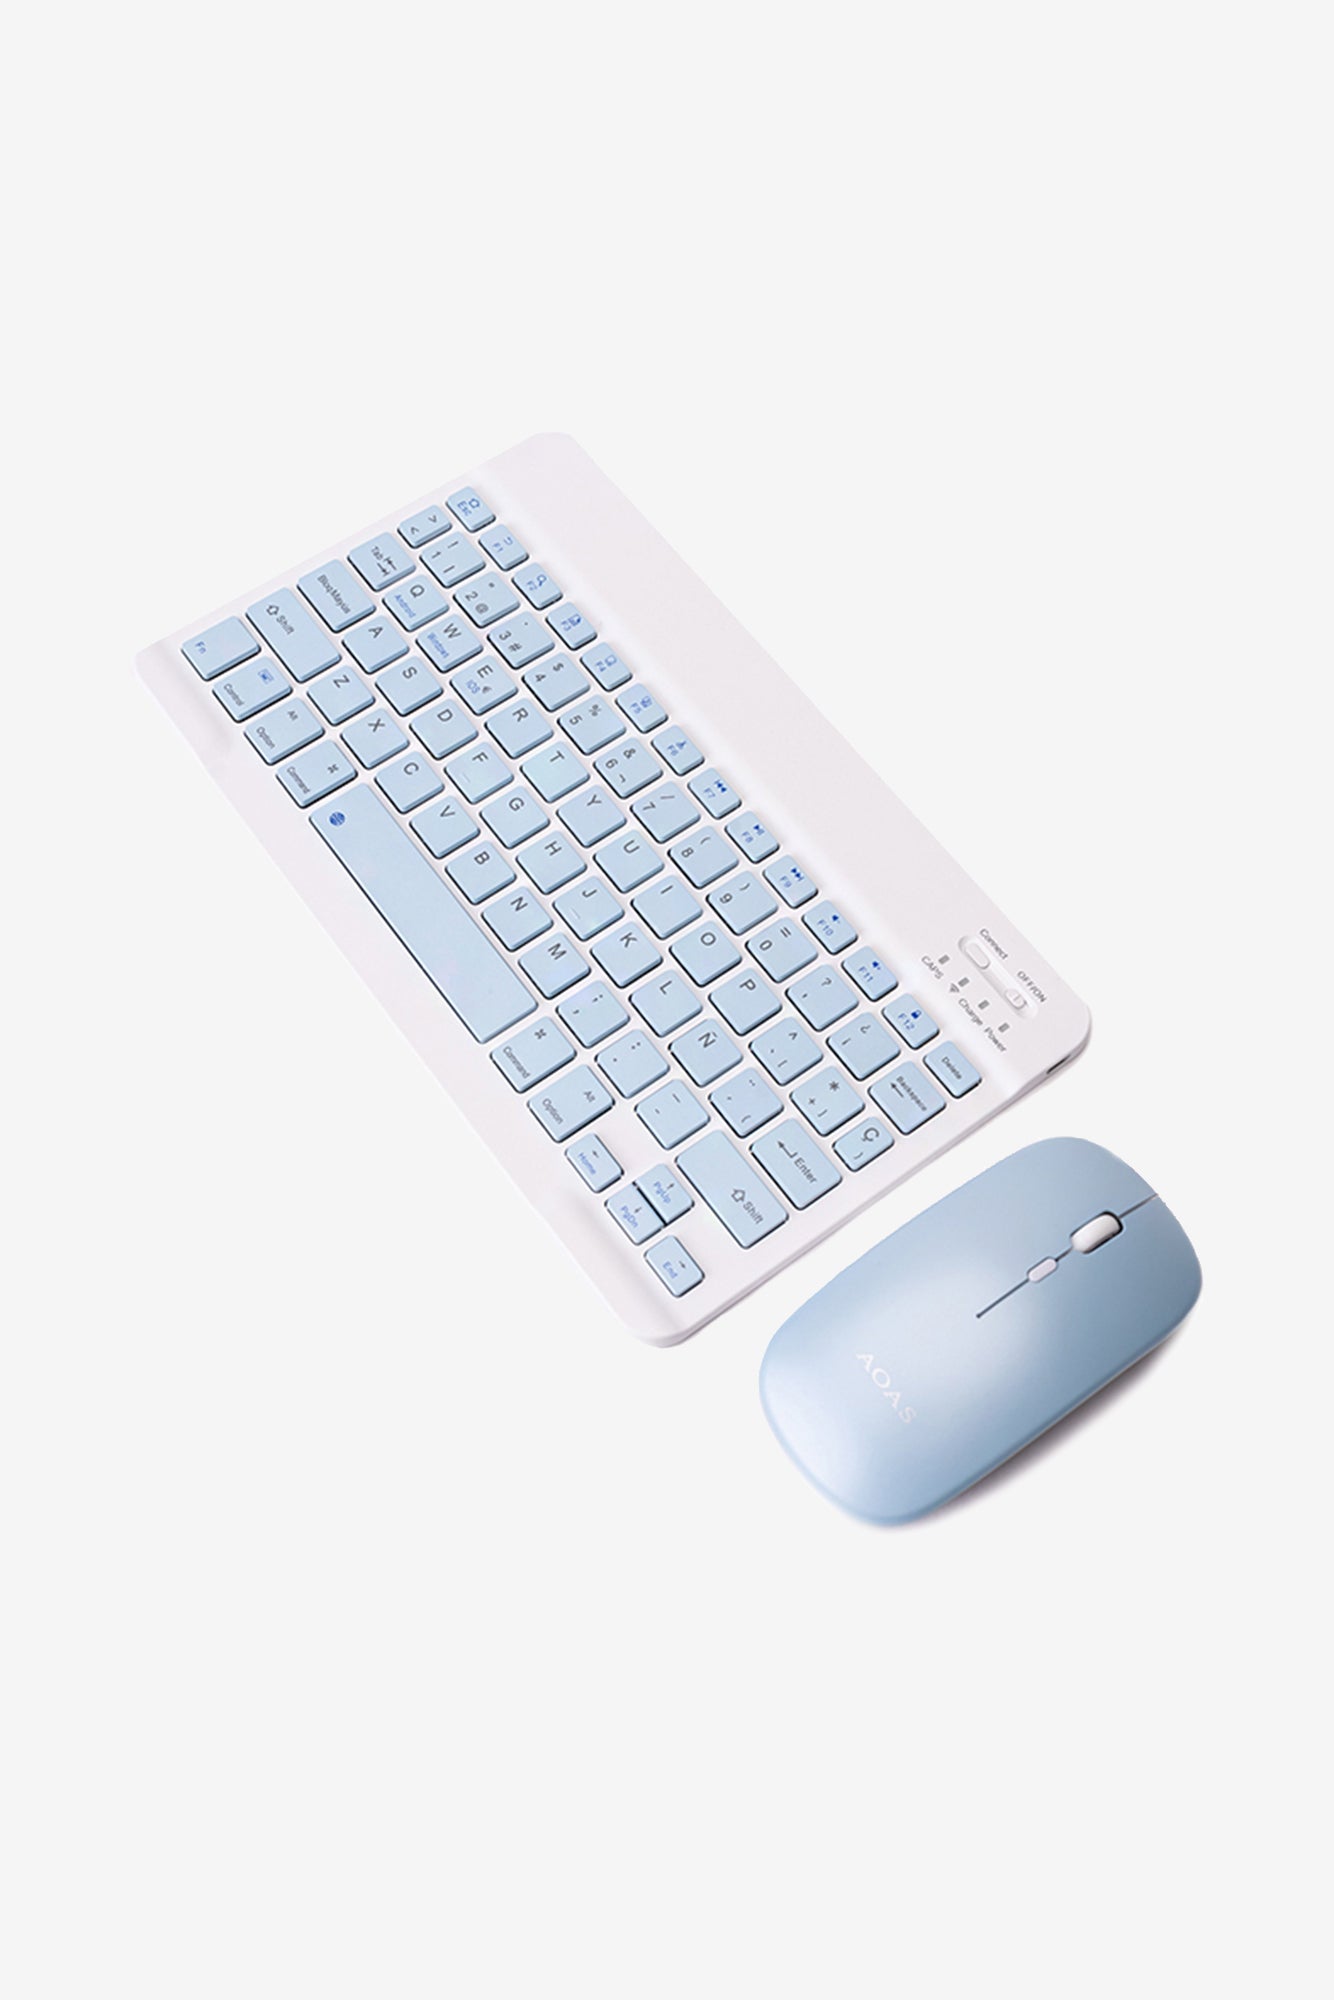 Kit Teclado y Mouse Celeste Chinitown Chinitown